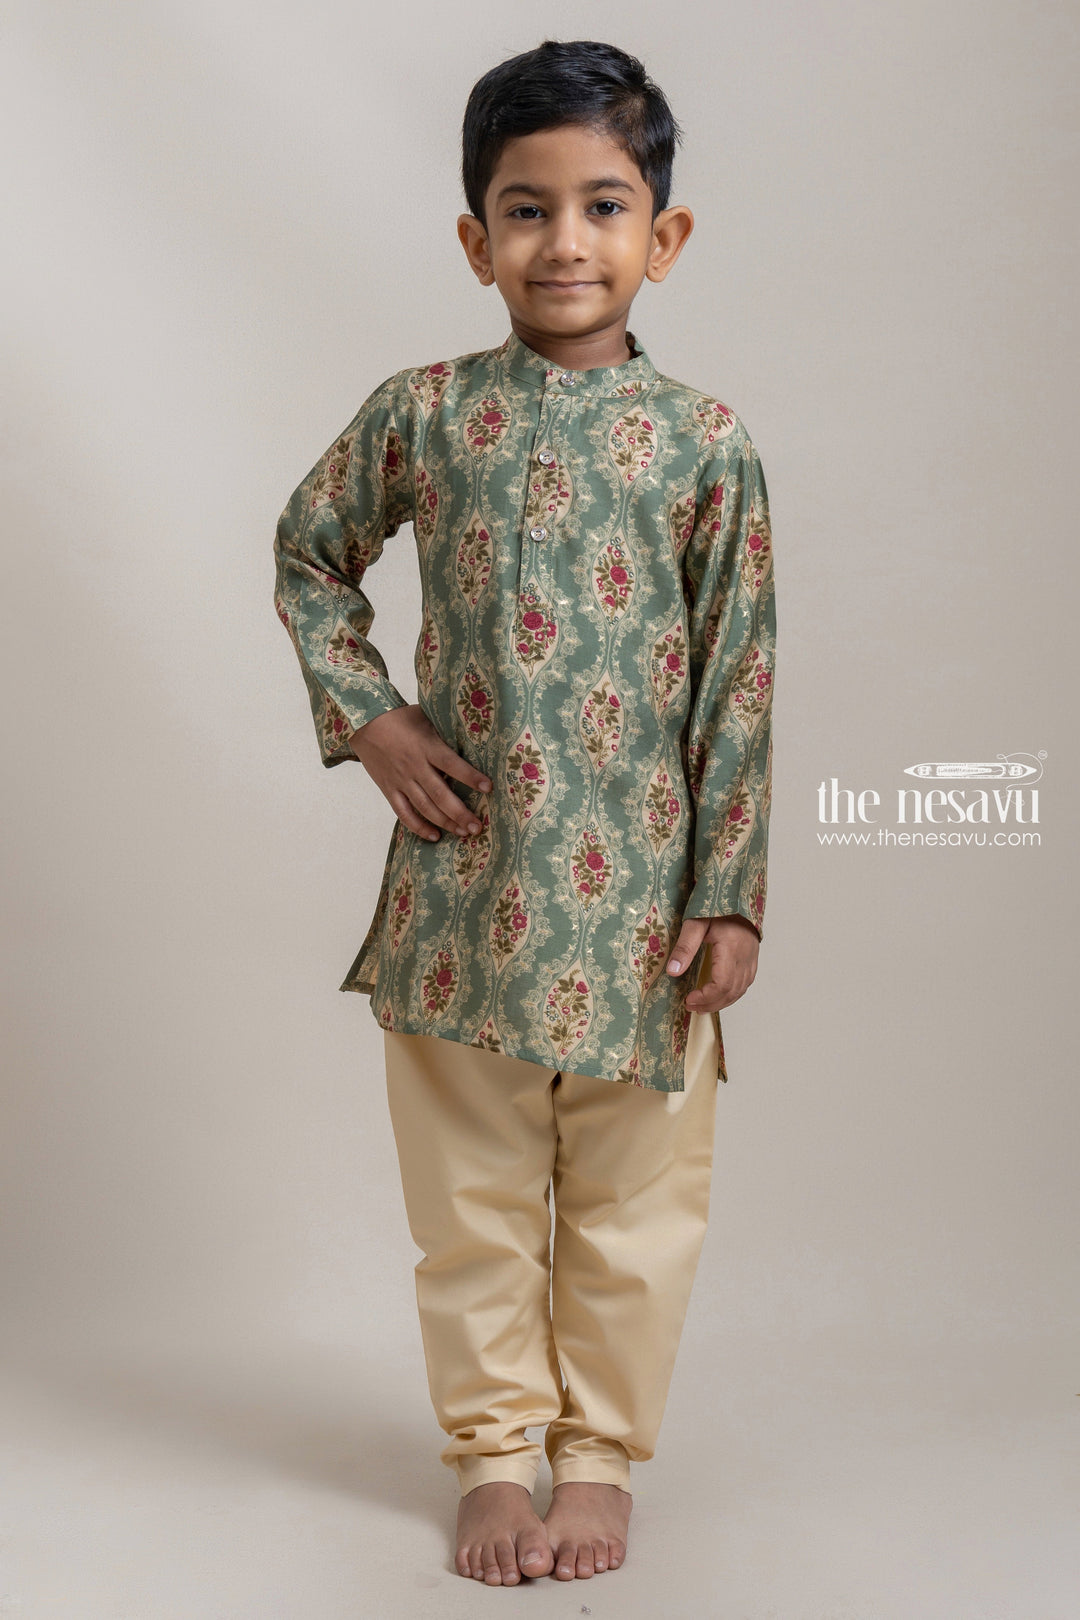 The Nesavu Boys Kurtha Set Stylish Green Floral Printed Ethnic Kurta With Beige Solid Pant For Boys Nesavu 14 (6M) / Green / Modal BES318A-14 Stand Out from the Crowd with The Nesavu's Fashionable Ethnic Wear for Boys The Nesavu